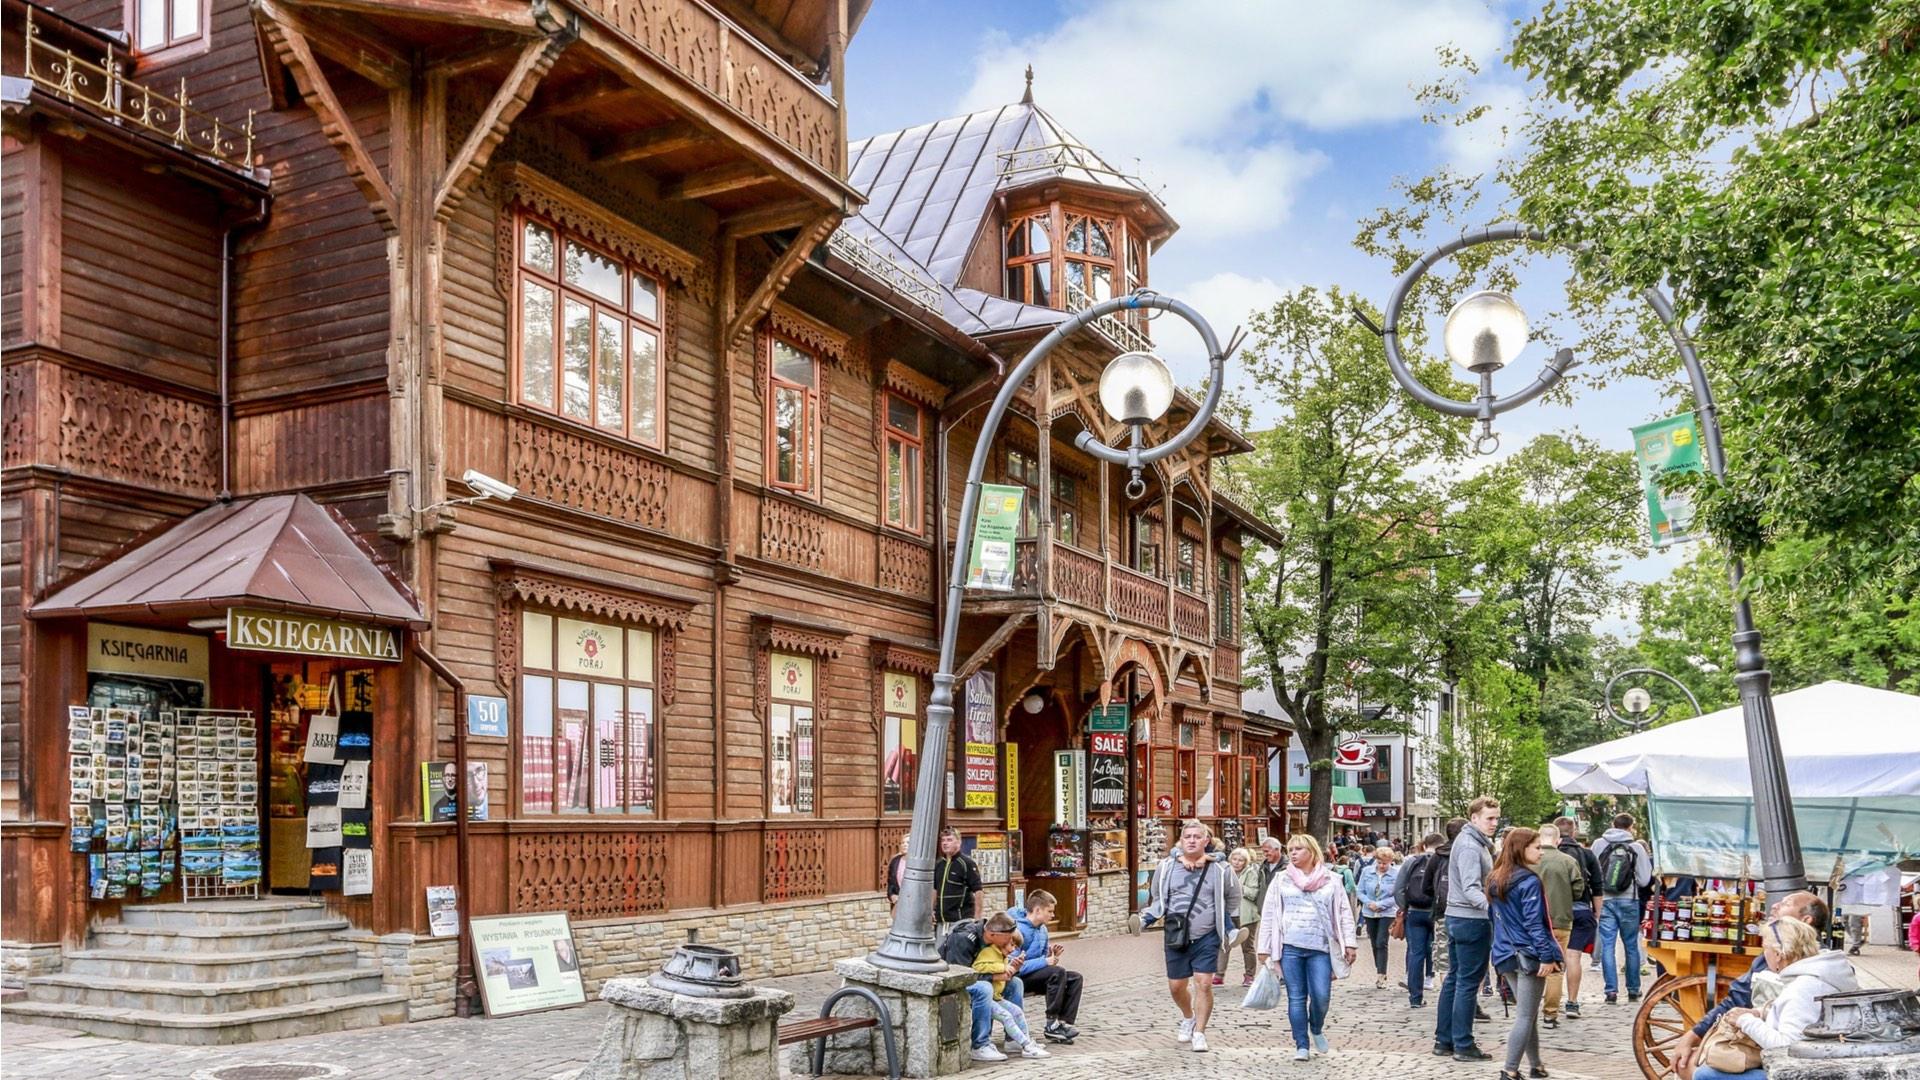 Krupówki Street, the busy pedestrian zone in Zakopane, is famous across Poland, with its charming century-old wooden town houses containing shops, restaurants and galleries. – © Agnes Kantaruk